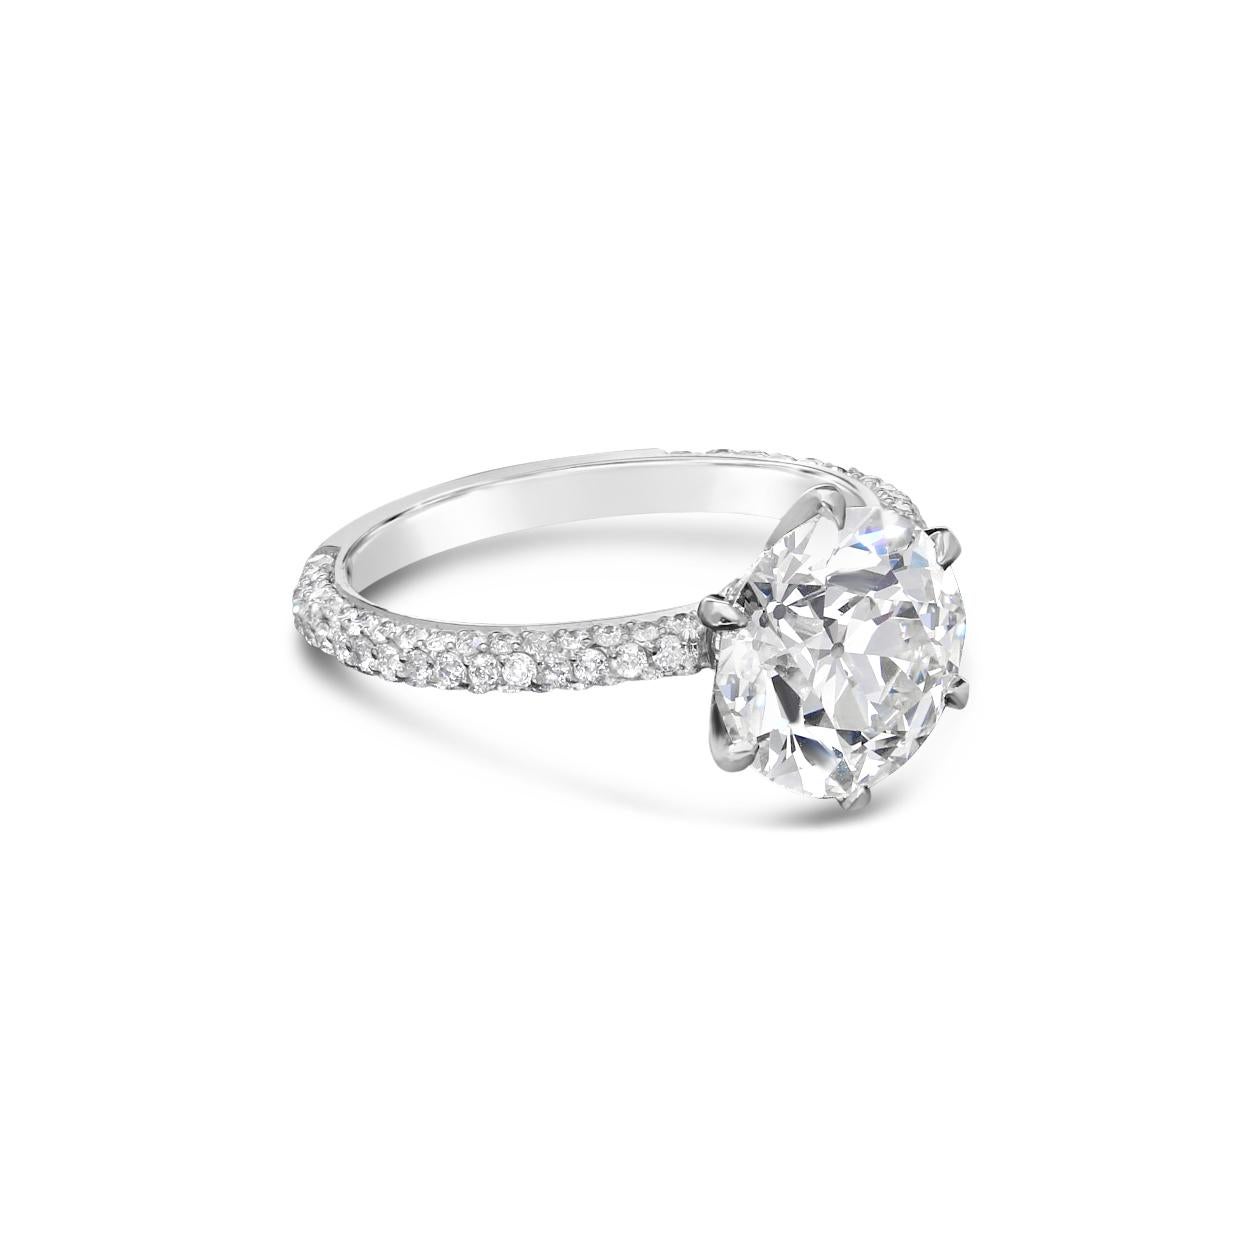 3.08ct H VS2 Old European brilliant cut diamond with GIA certificate 
Platinum with London assay marks
UK finger size L 1/2, US size 6.25, can be adjusted to your own finger size
4.5 grams

A stunning diamond solitaire ring by Hancocks centred with